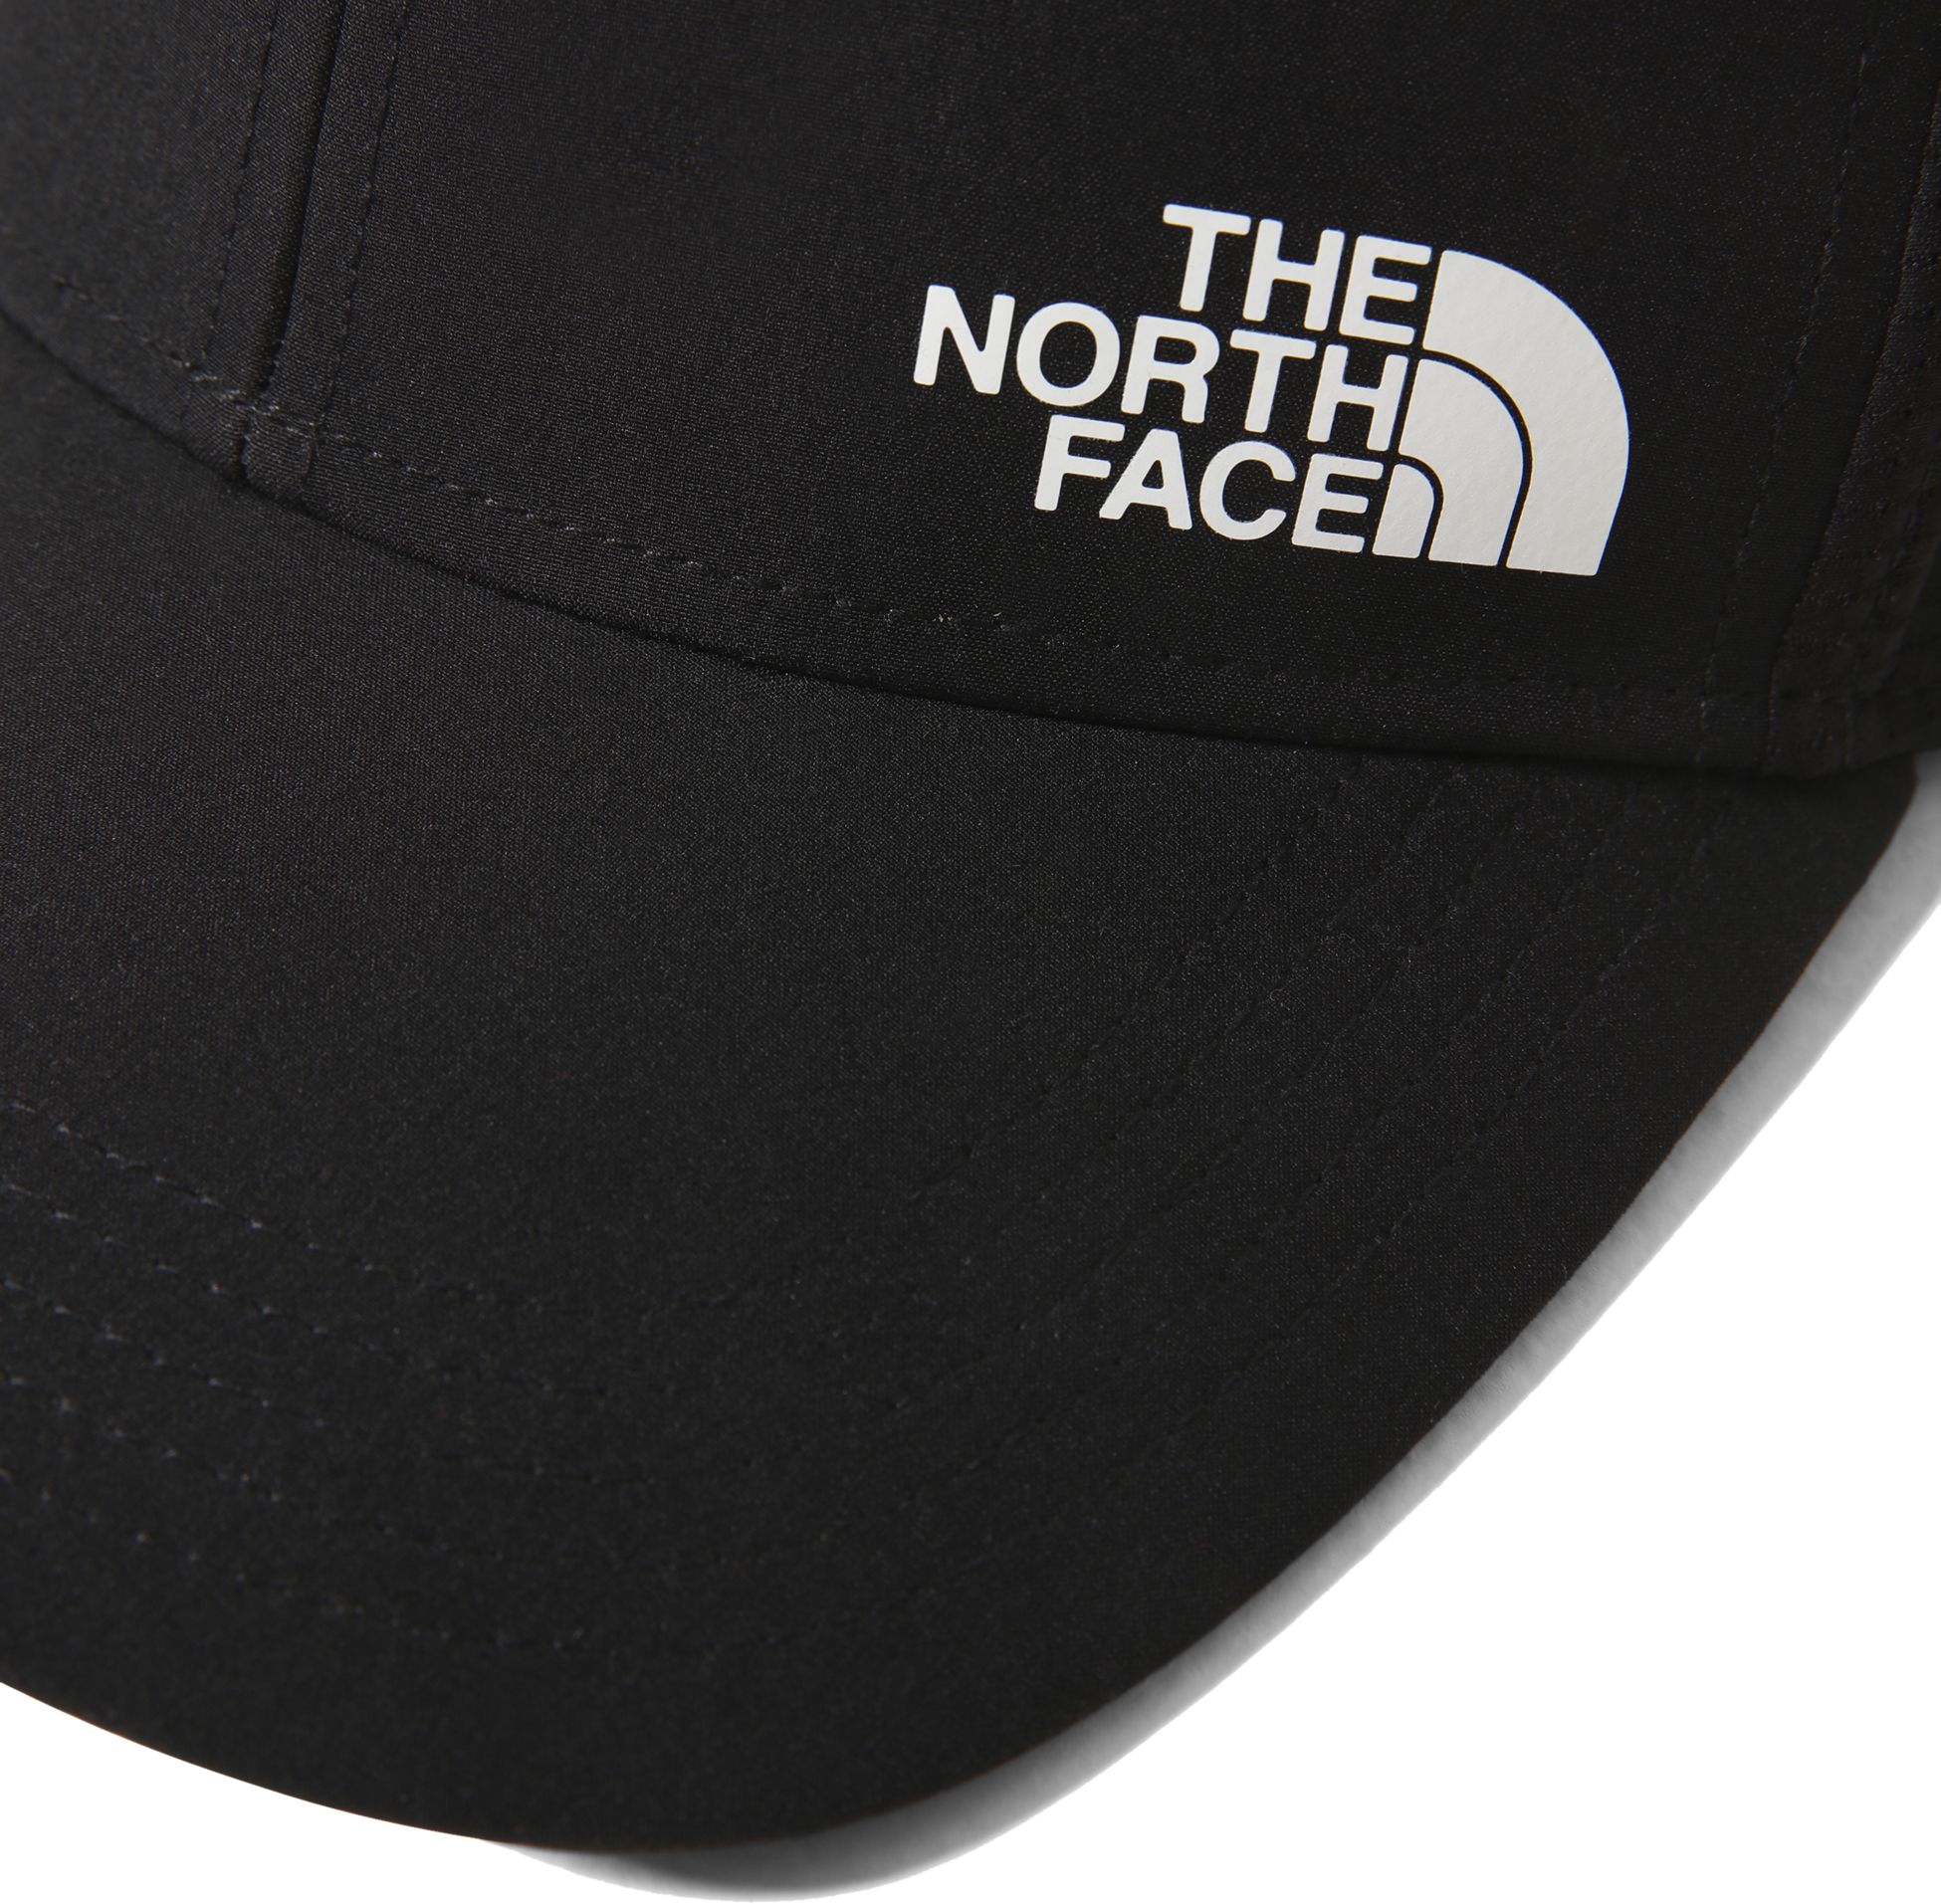 THE NORTH FACE, TRAIL TRUCKER 2.0